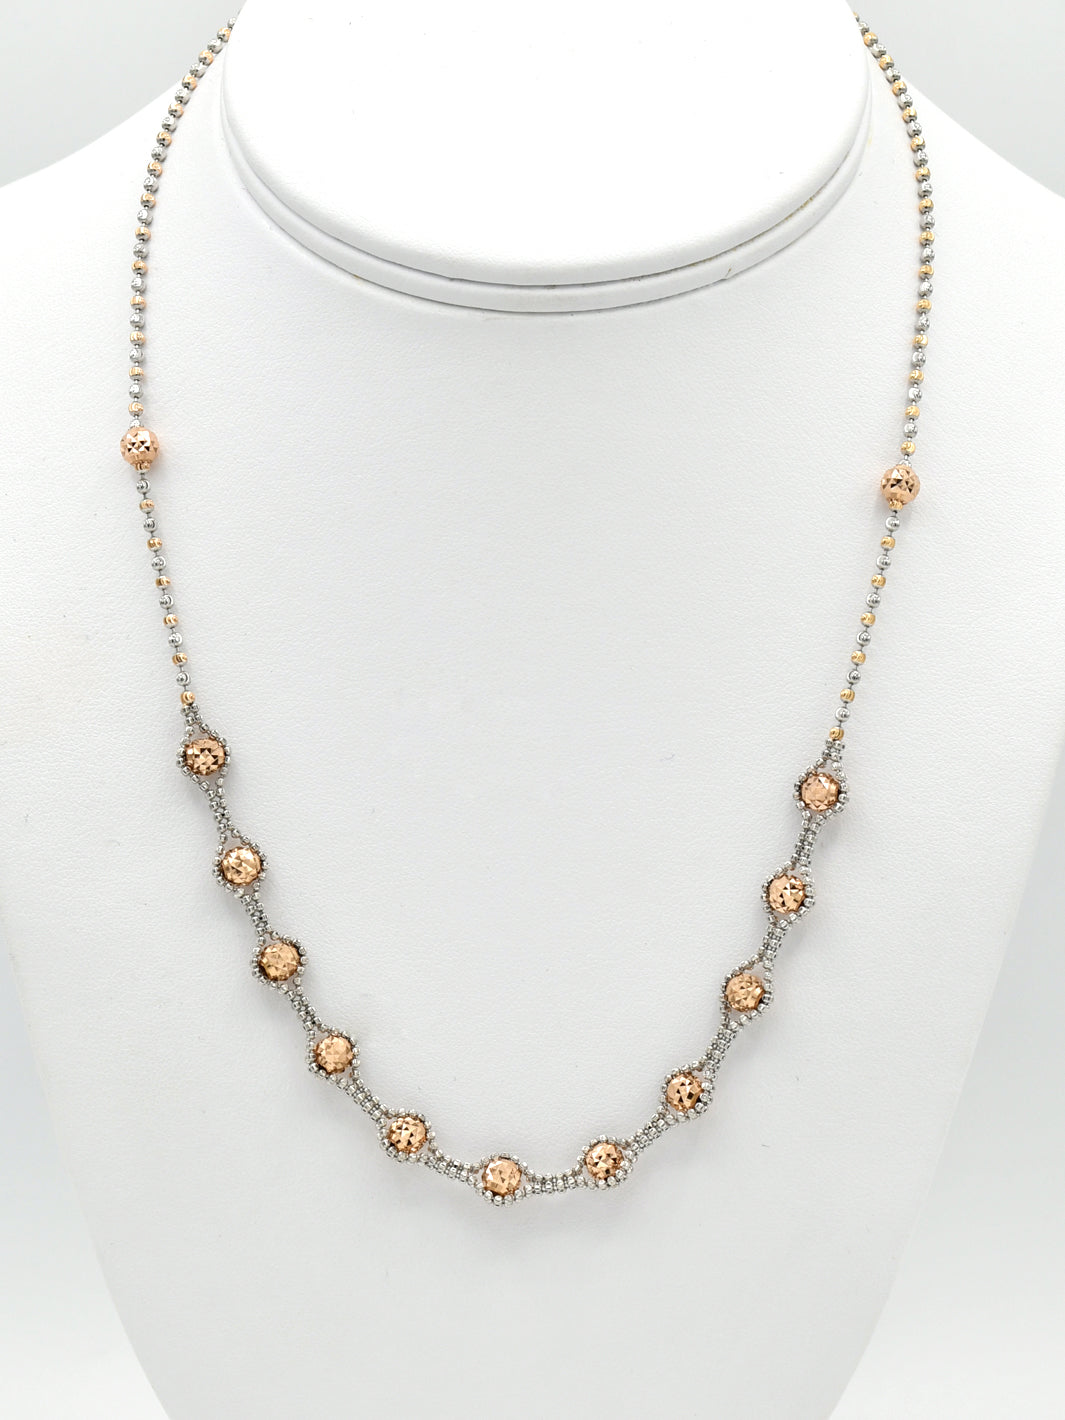 18ct Rose Gold Two Tone Fancy Chain - Roop Darshan